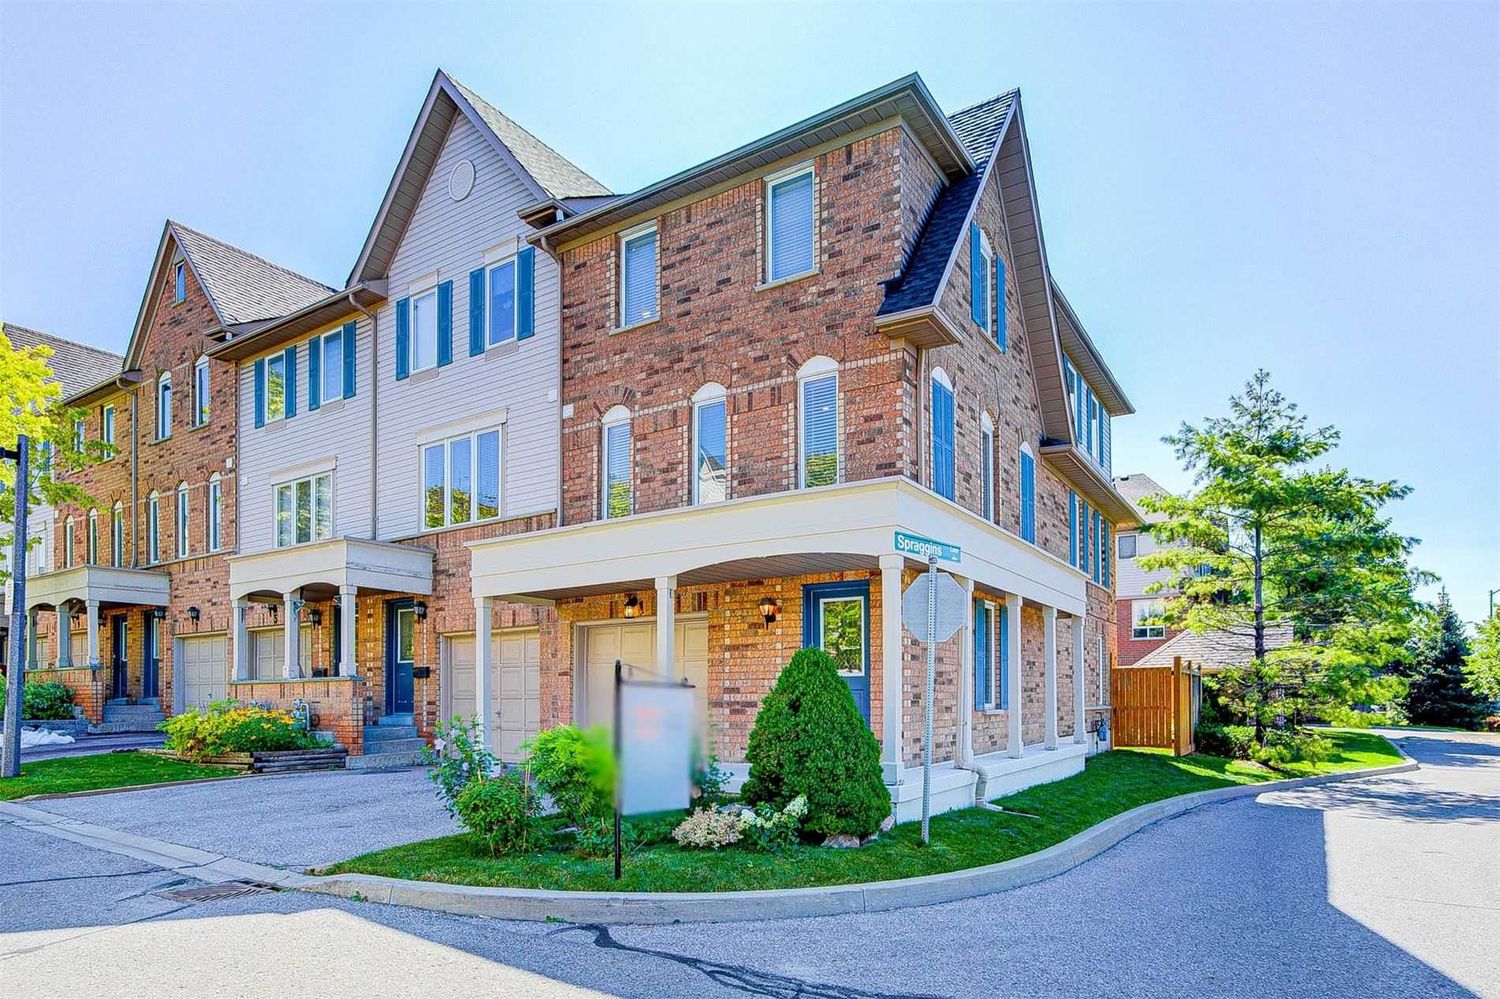 1-100 McGonigal Lane. Applecroft Park Townhomes is located in  Ajax, Toronto - image #1 of 2